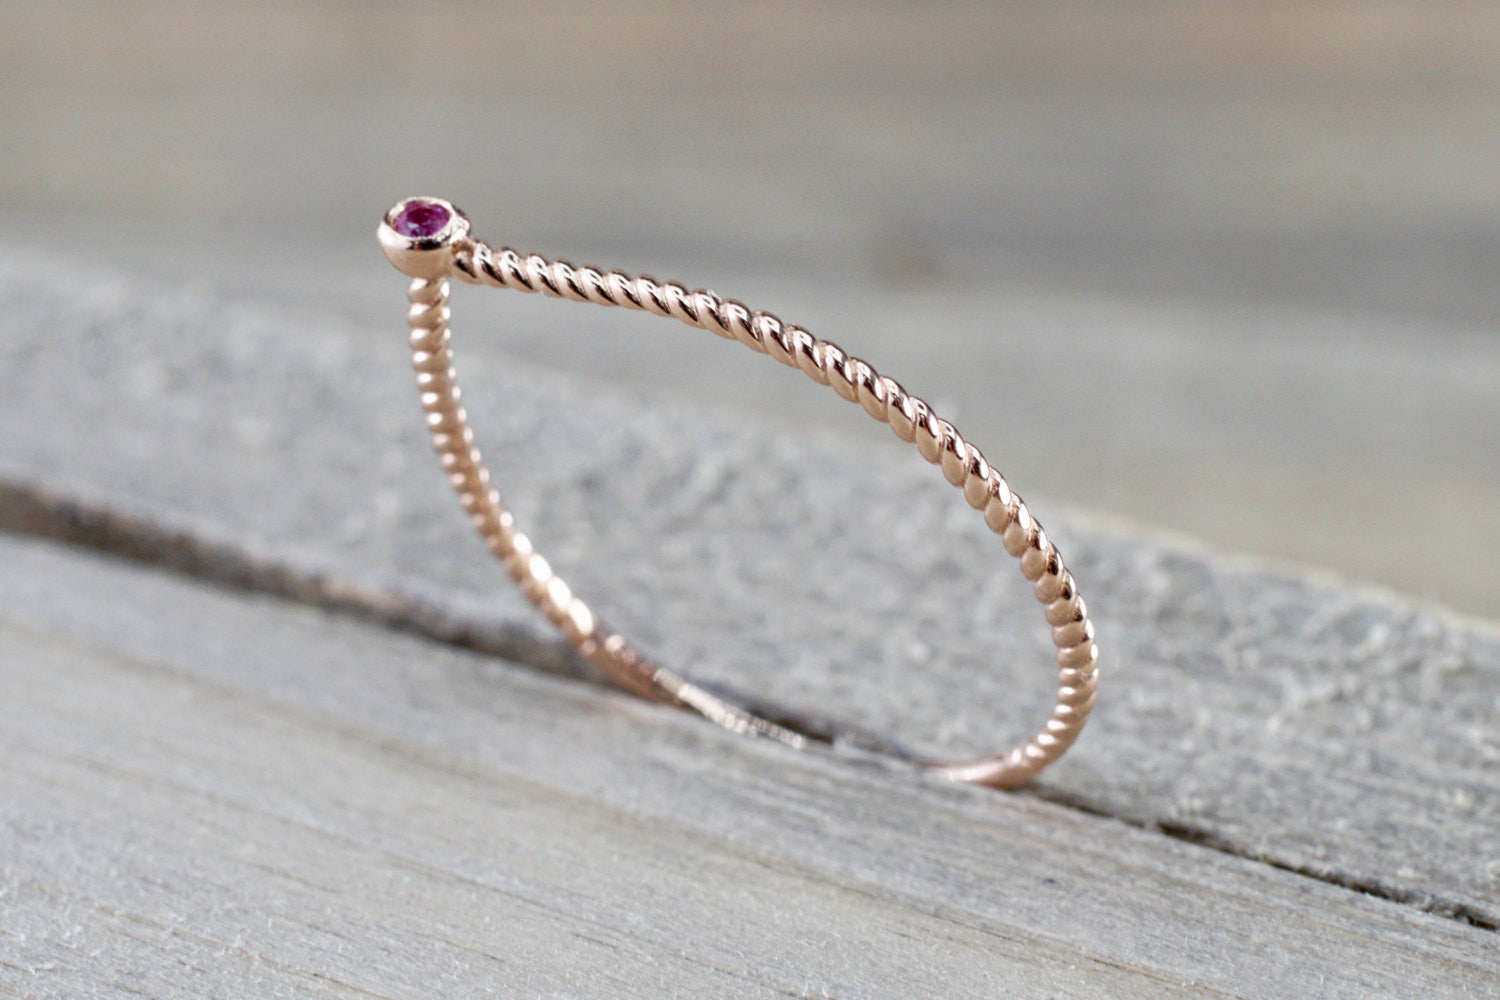 14k Rose Gold Round Cut Pink Sapphire Bezel Fashion Ring Rope Design Band - Brilliant Facets